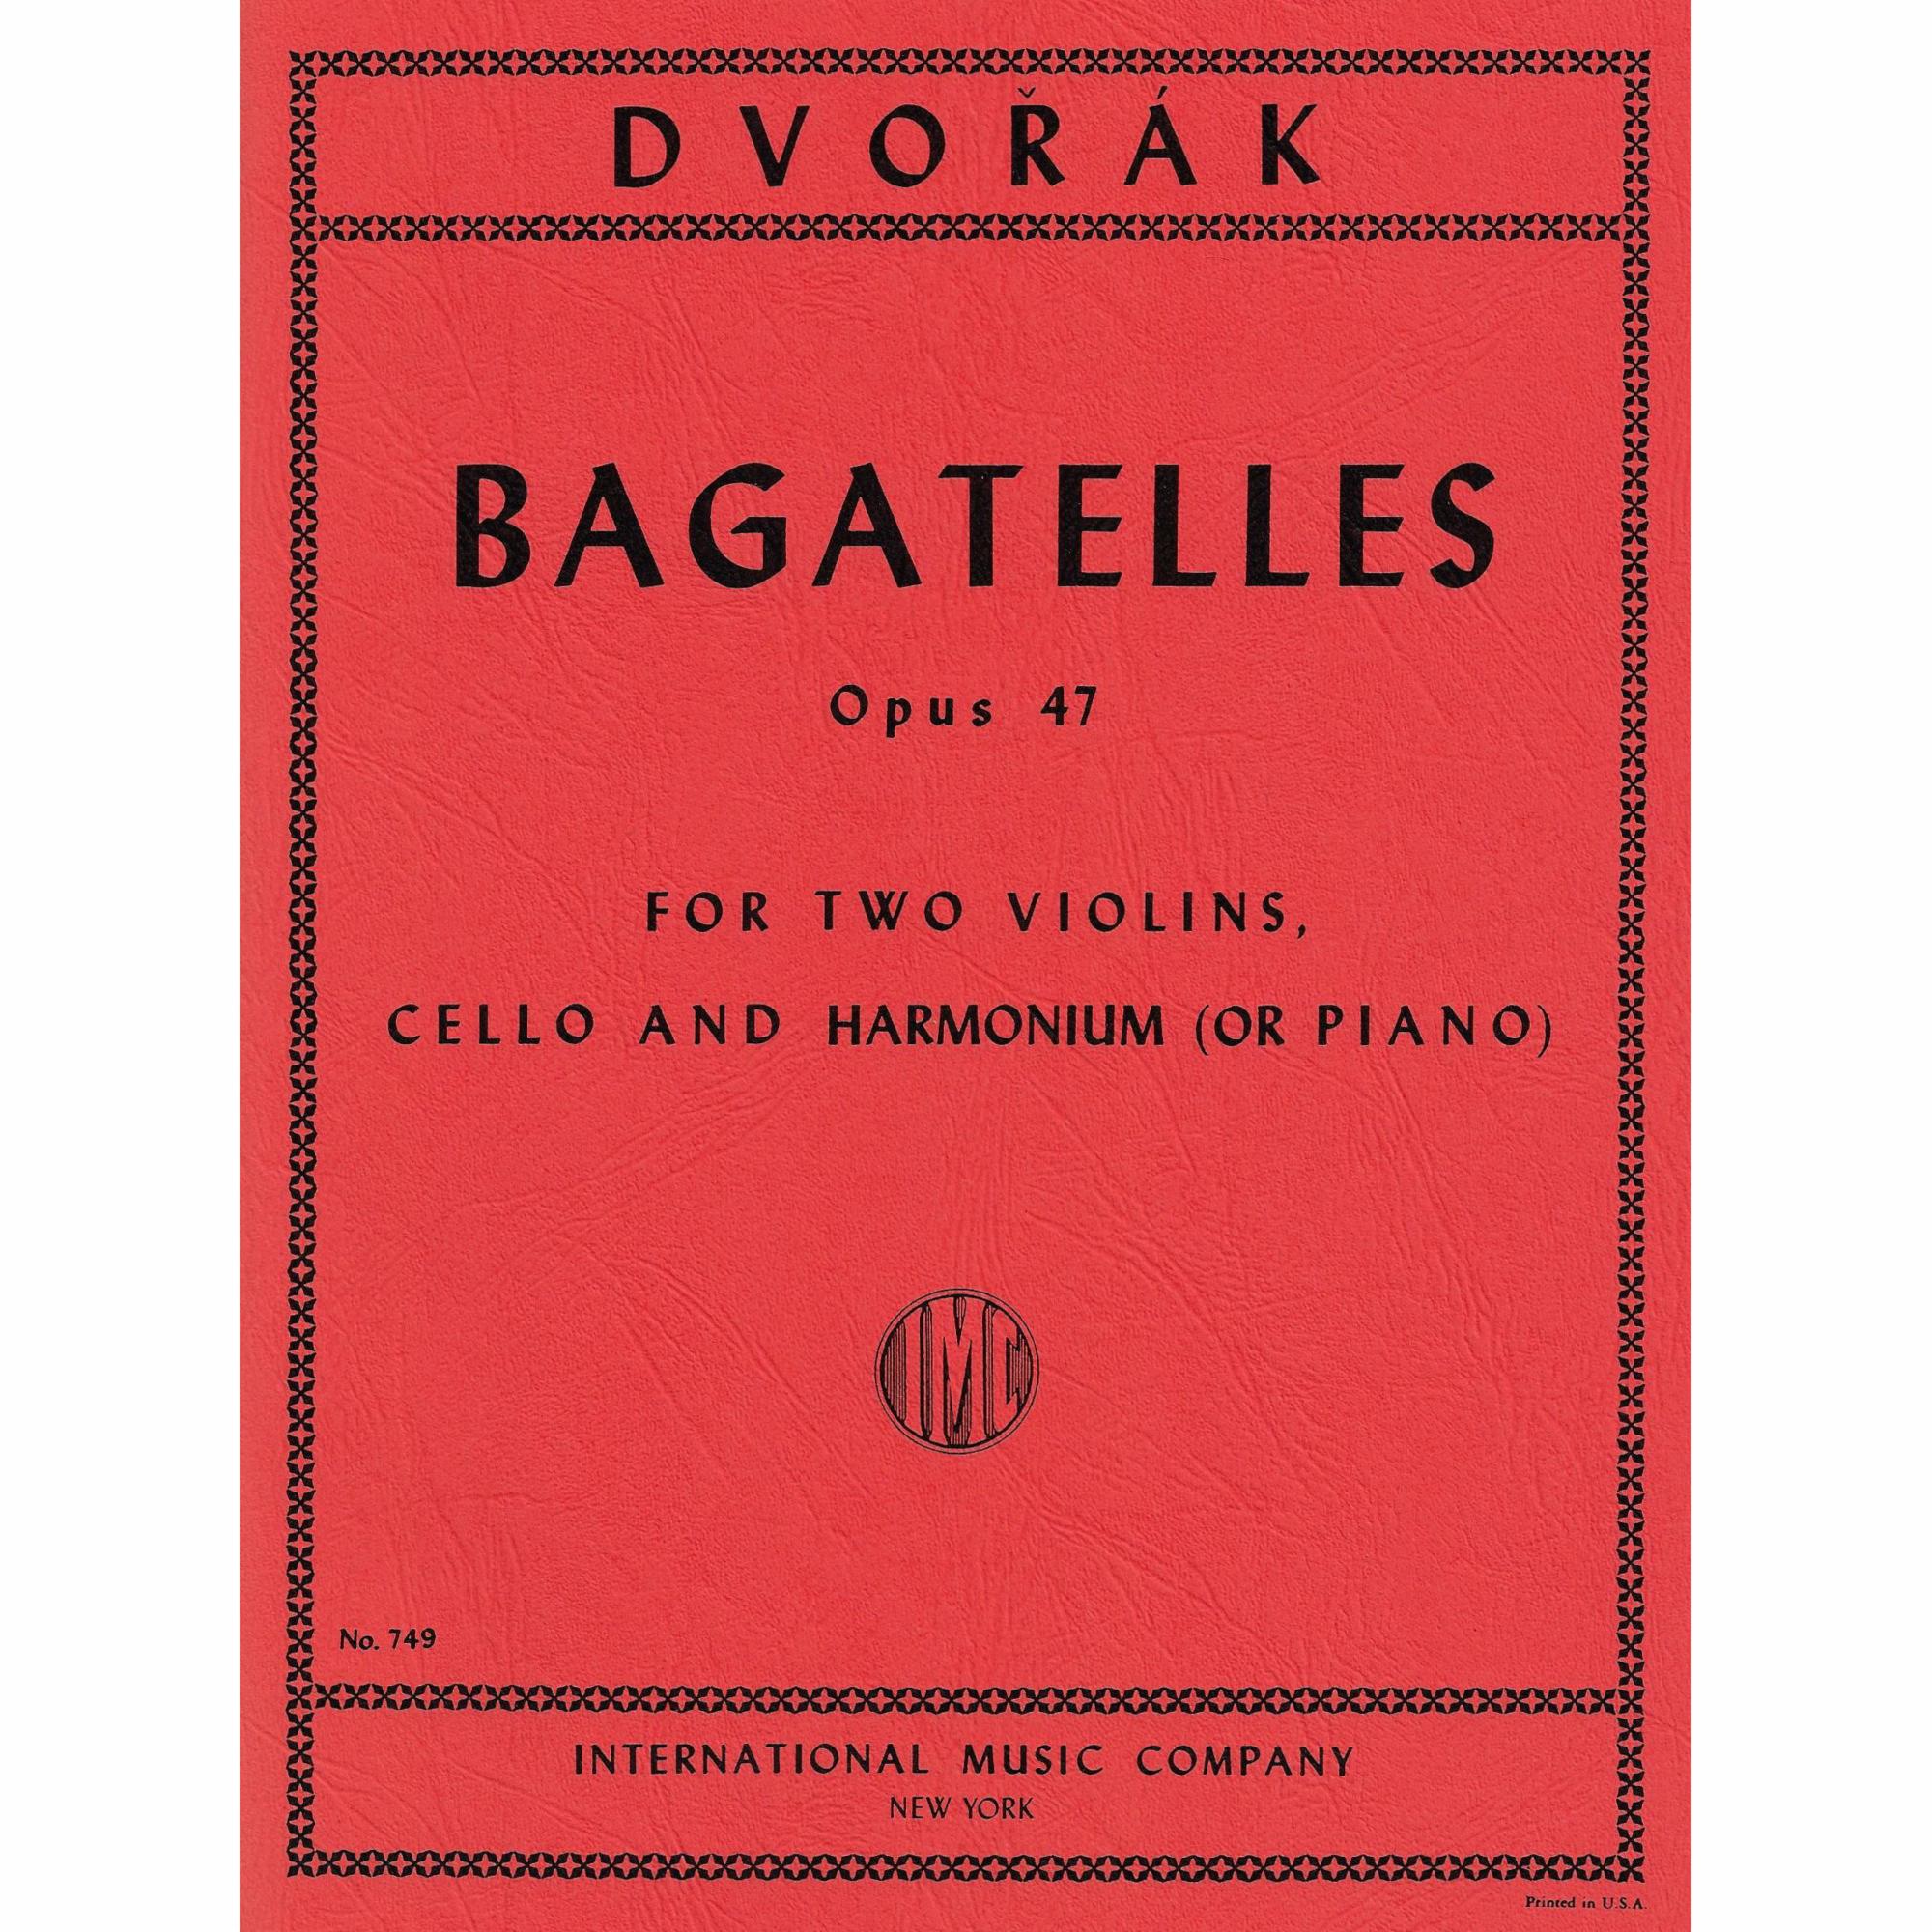 Dvorak -- Bagatelles, Op. 47 for Two Violins, Cello, and Piano